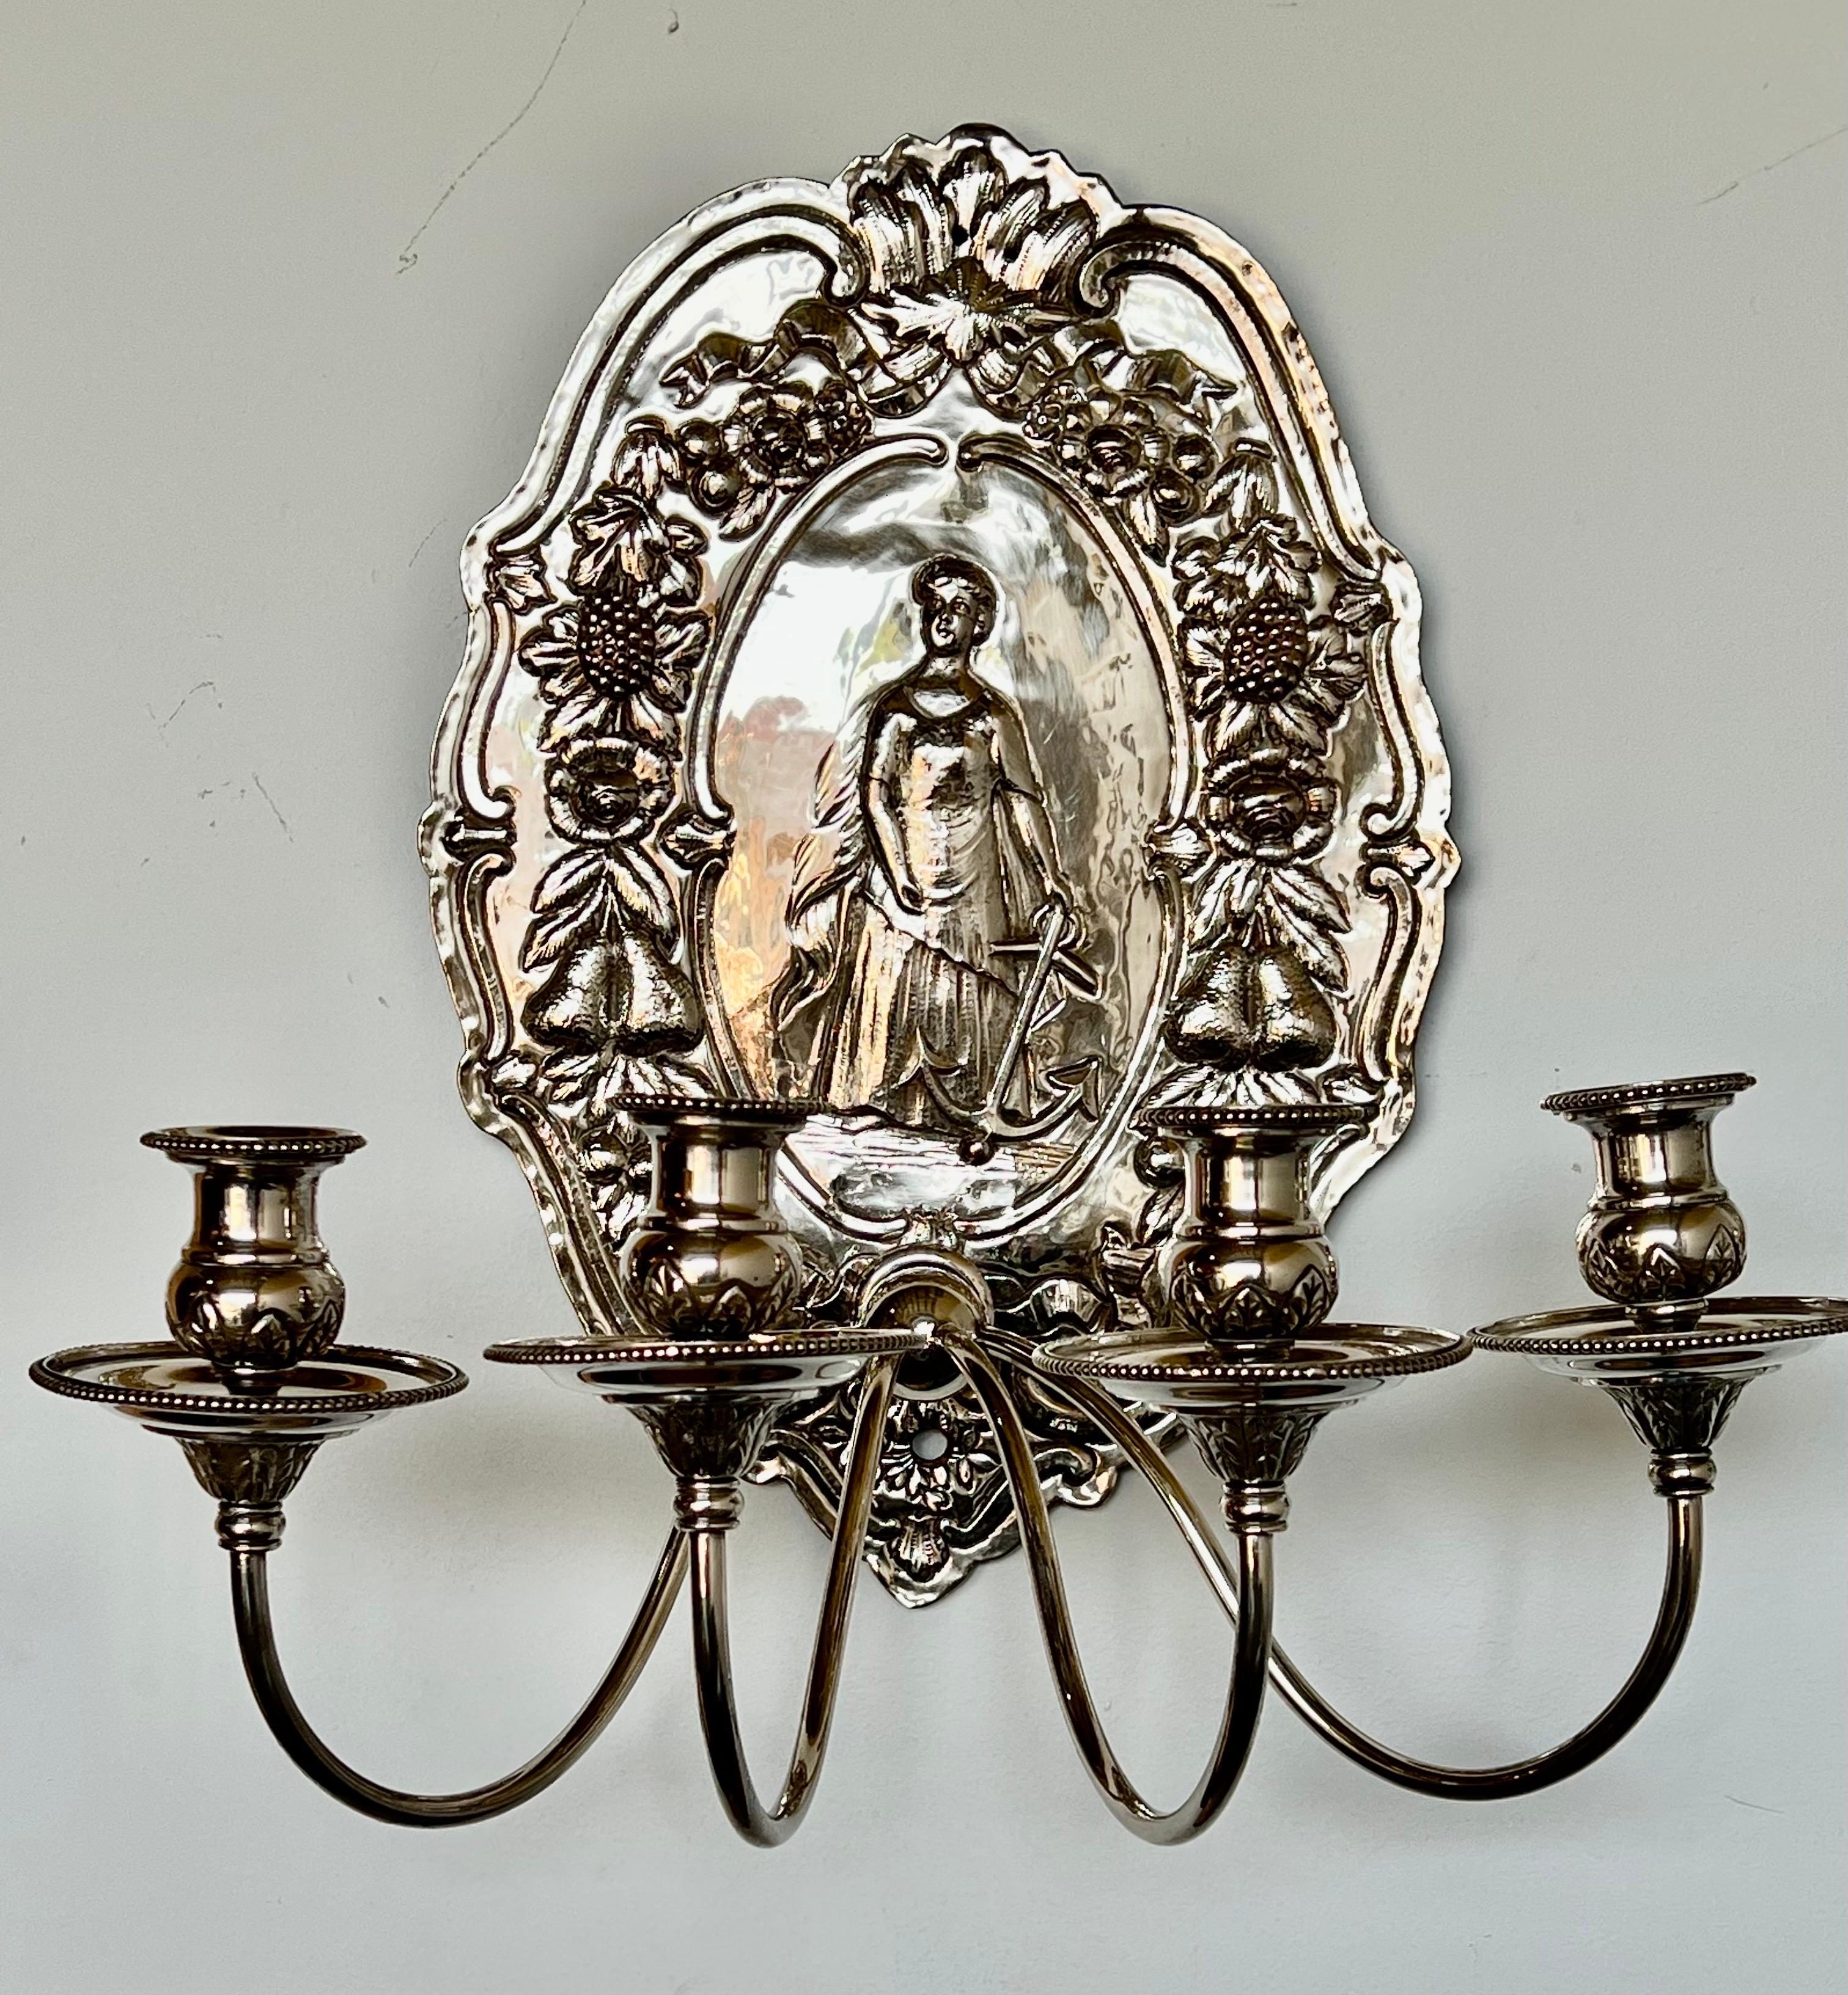 Other Pair of 19th C. English Silvered Sconces For Sale